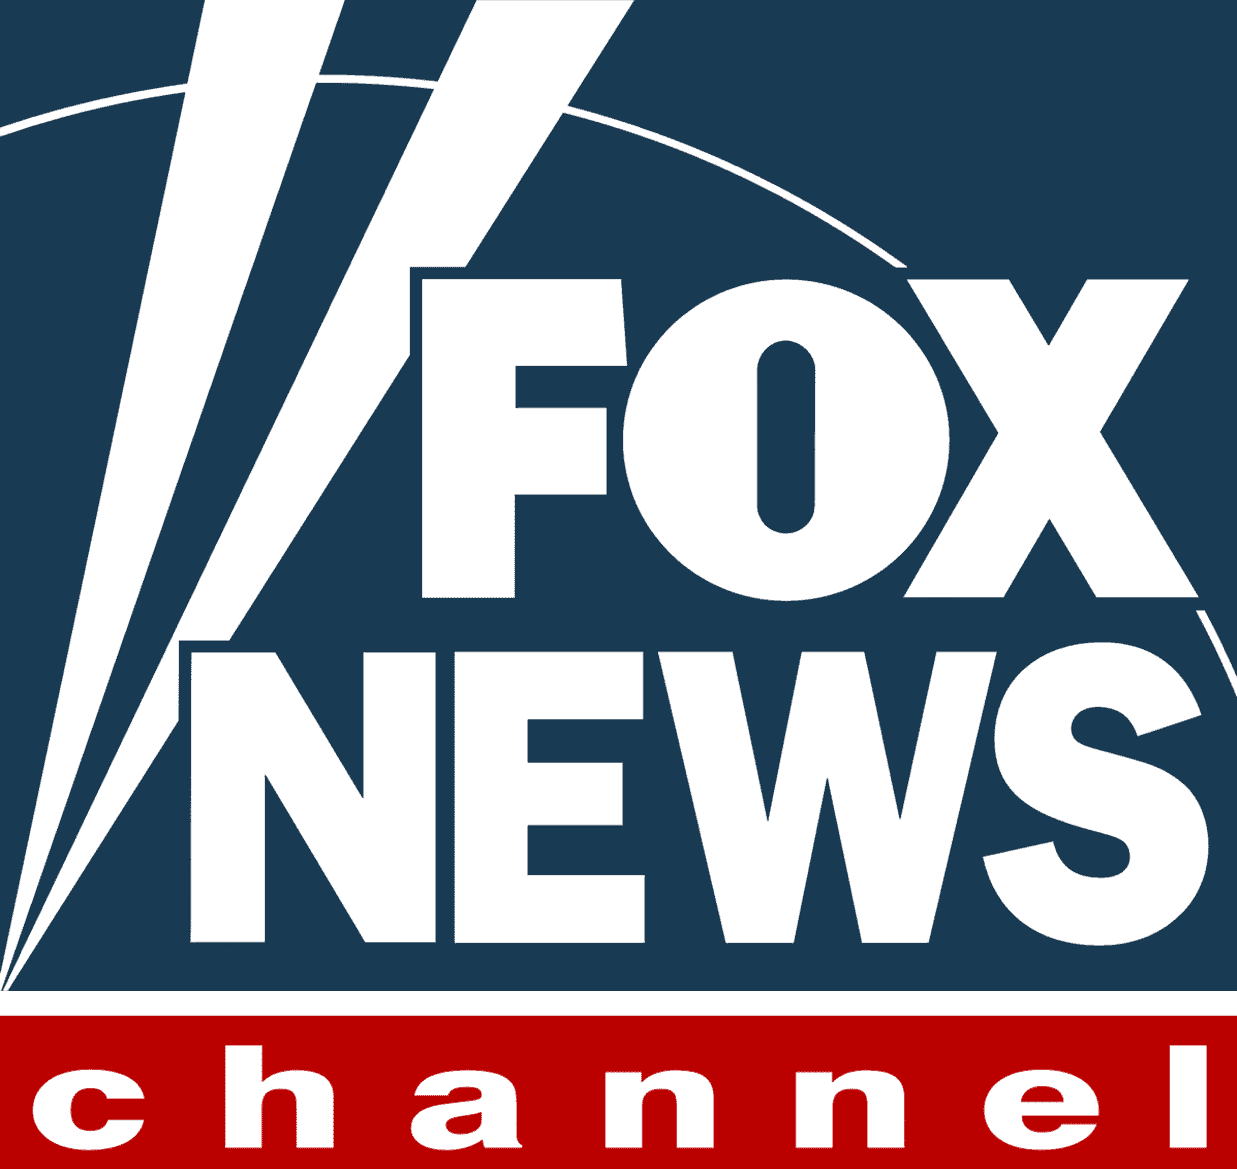 How to Watch Fox News Live Without Cable